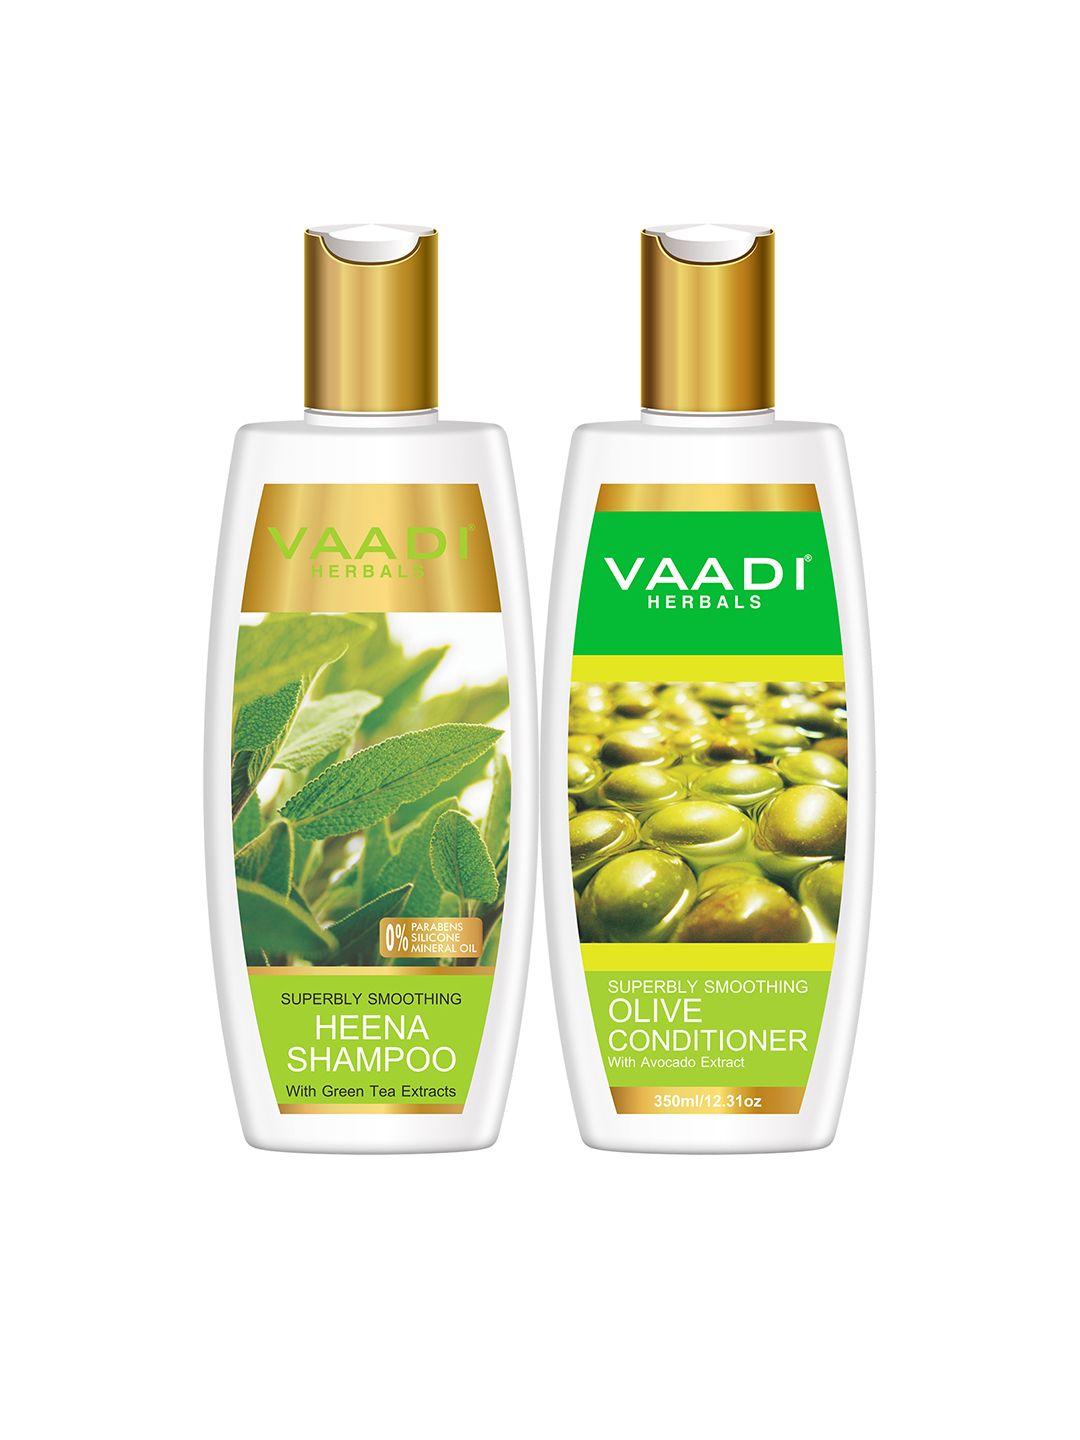 vaadi herbals set of superbly smoothing heena shampoo & olive conditioner - 350ml each